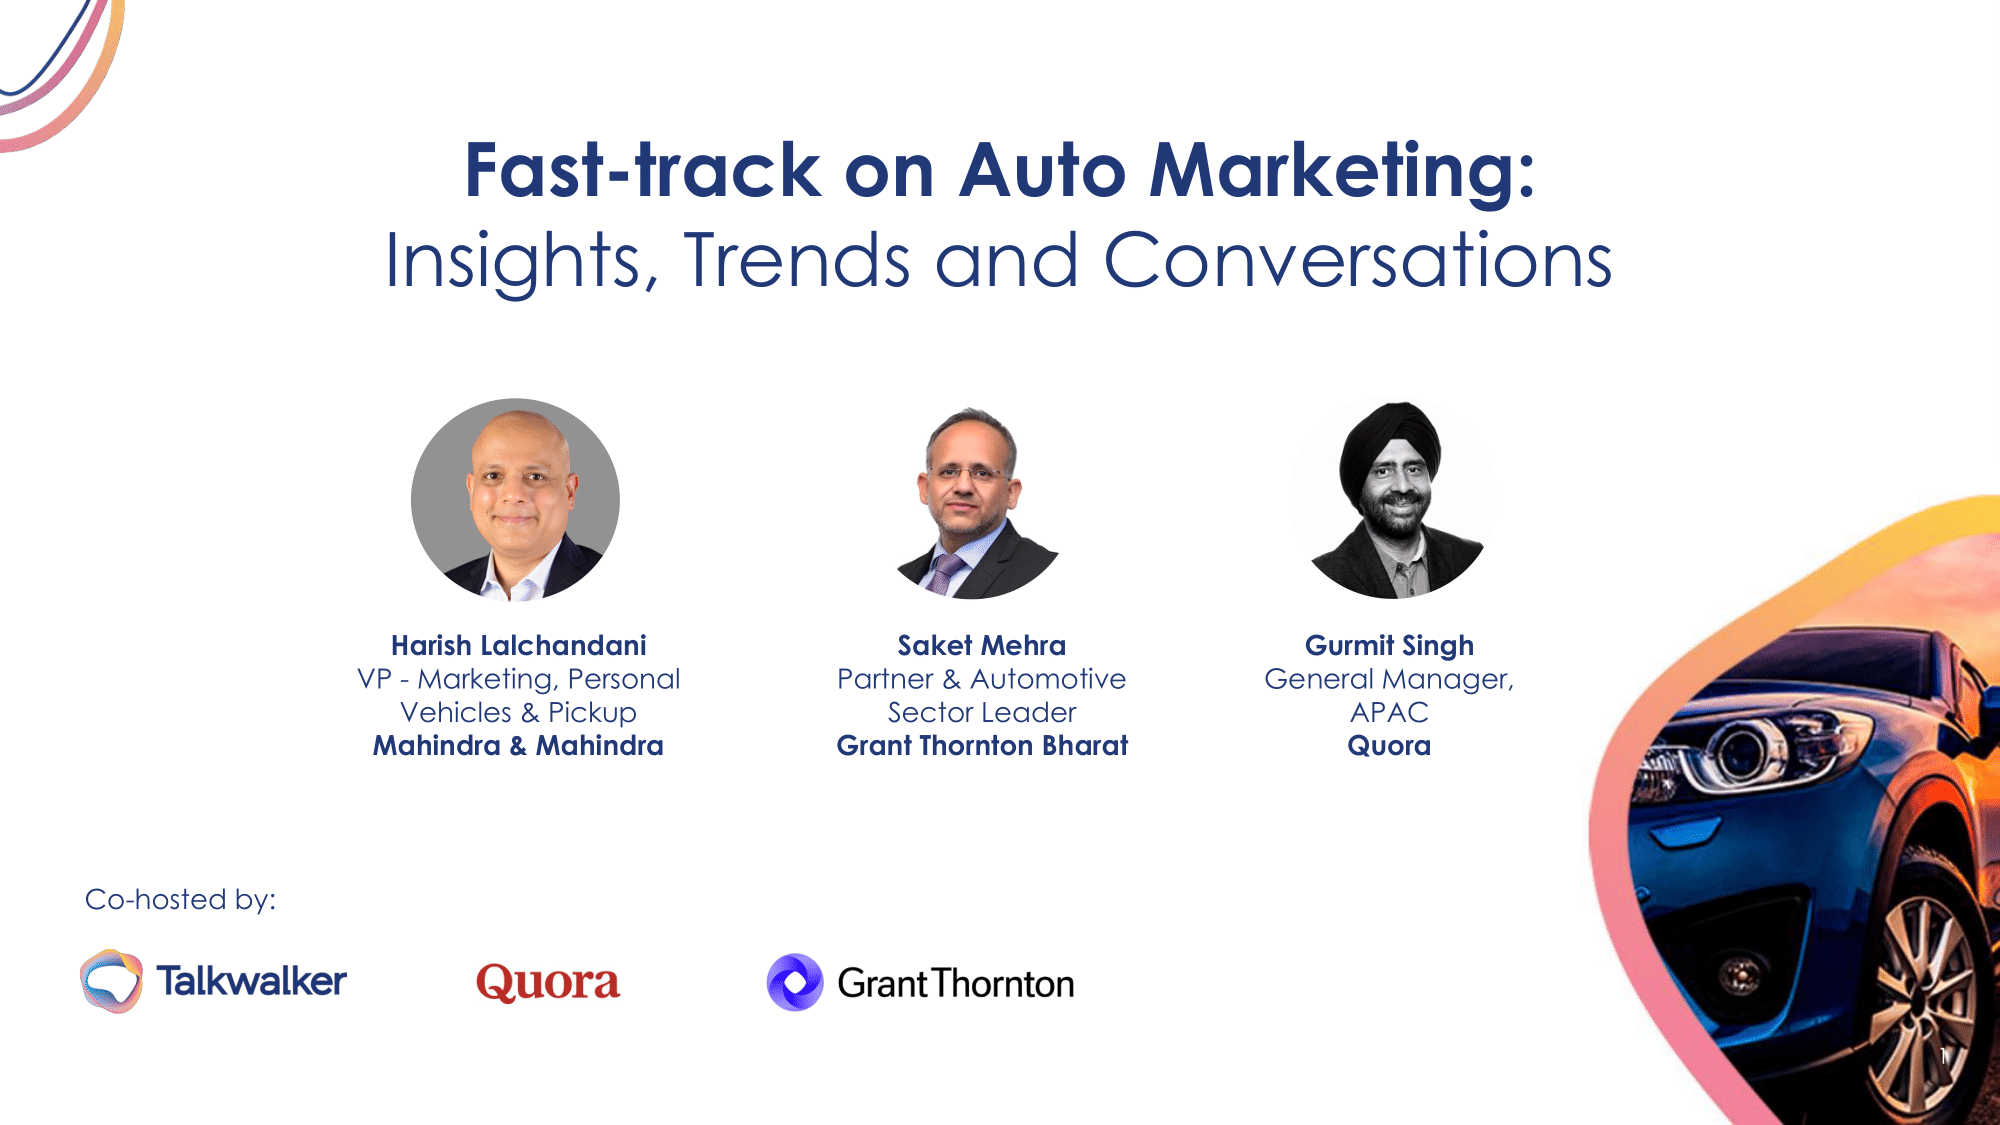 Fast-track on Auto Marketing: Insights, Trends, and Conversations